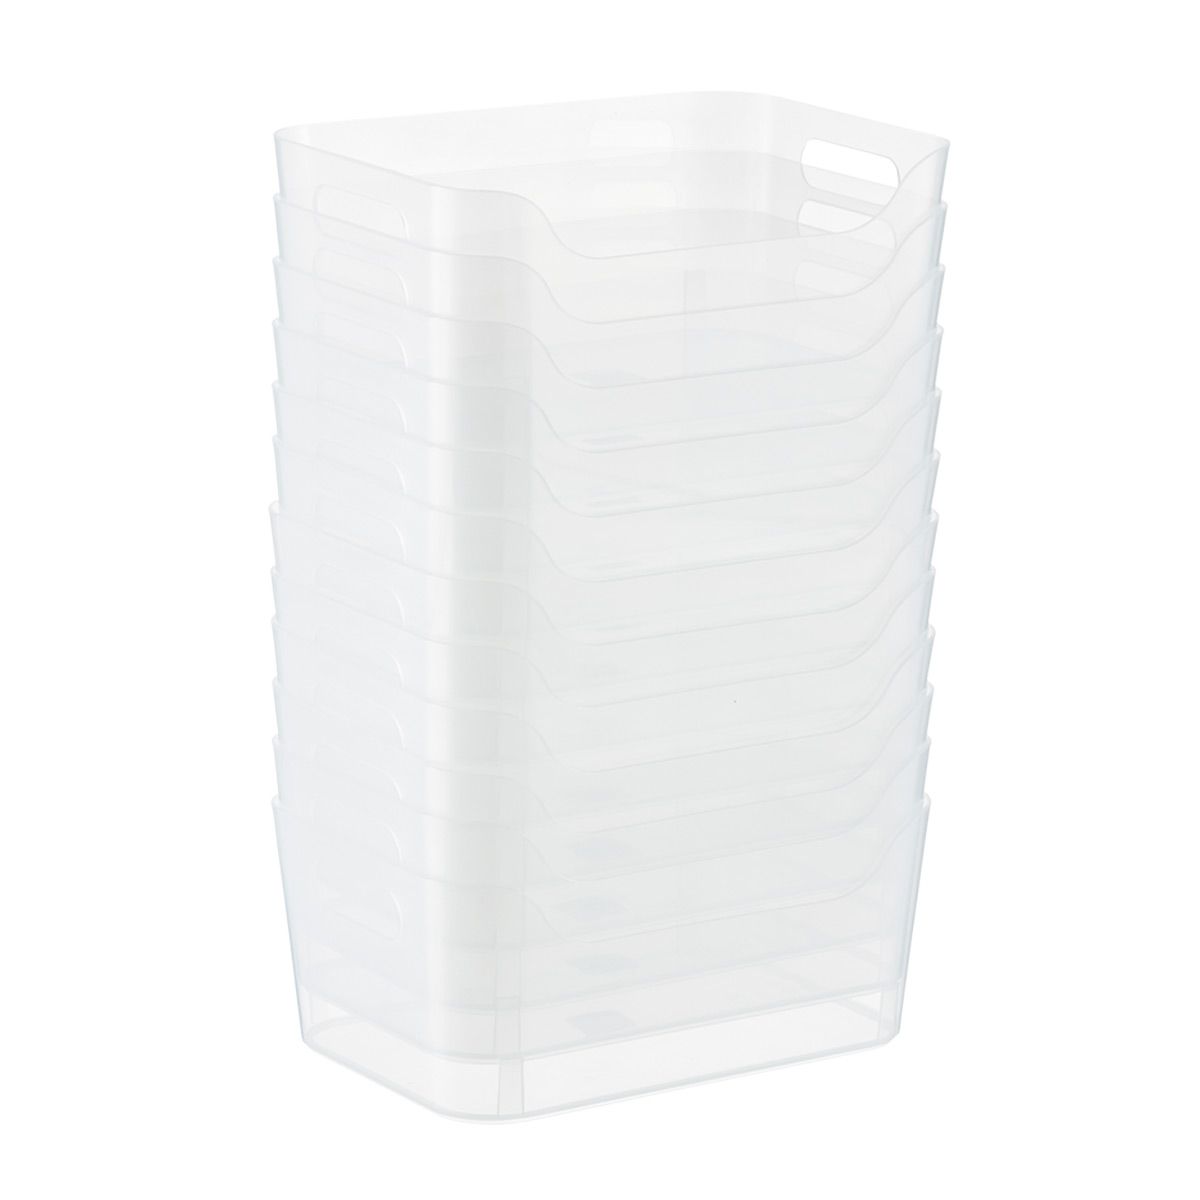 Small Plastic Bins w/ Handles | The Container Store